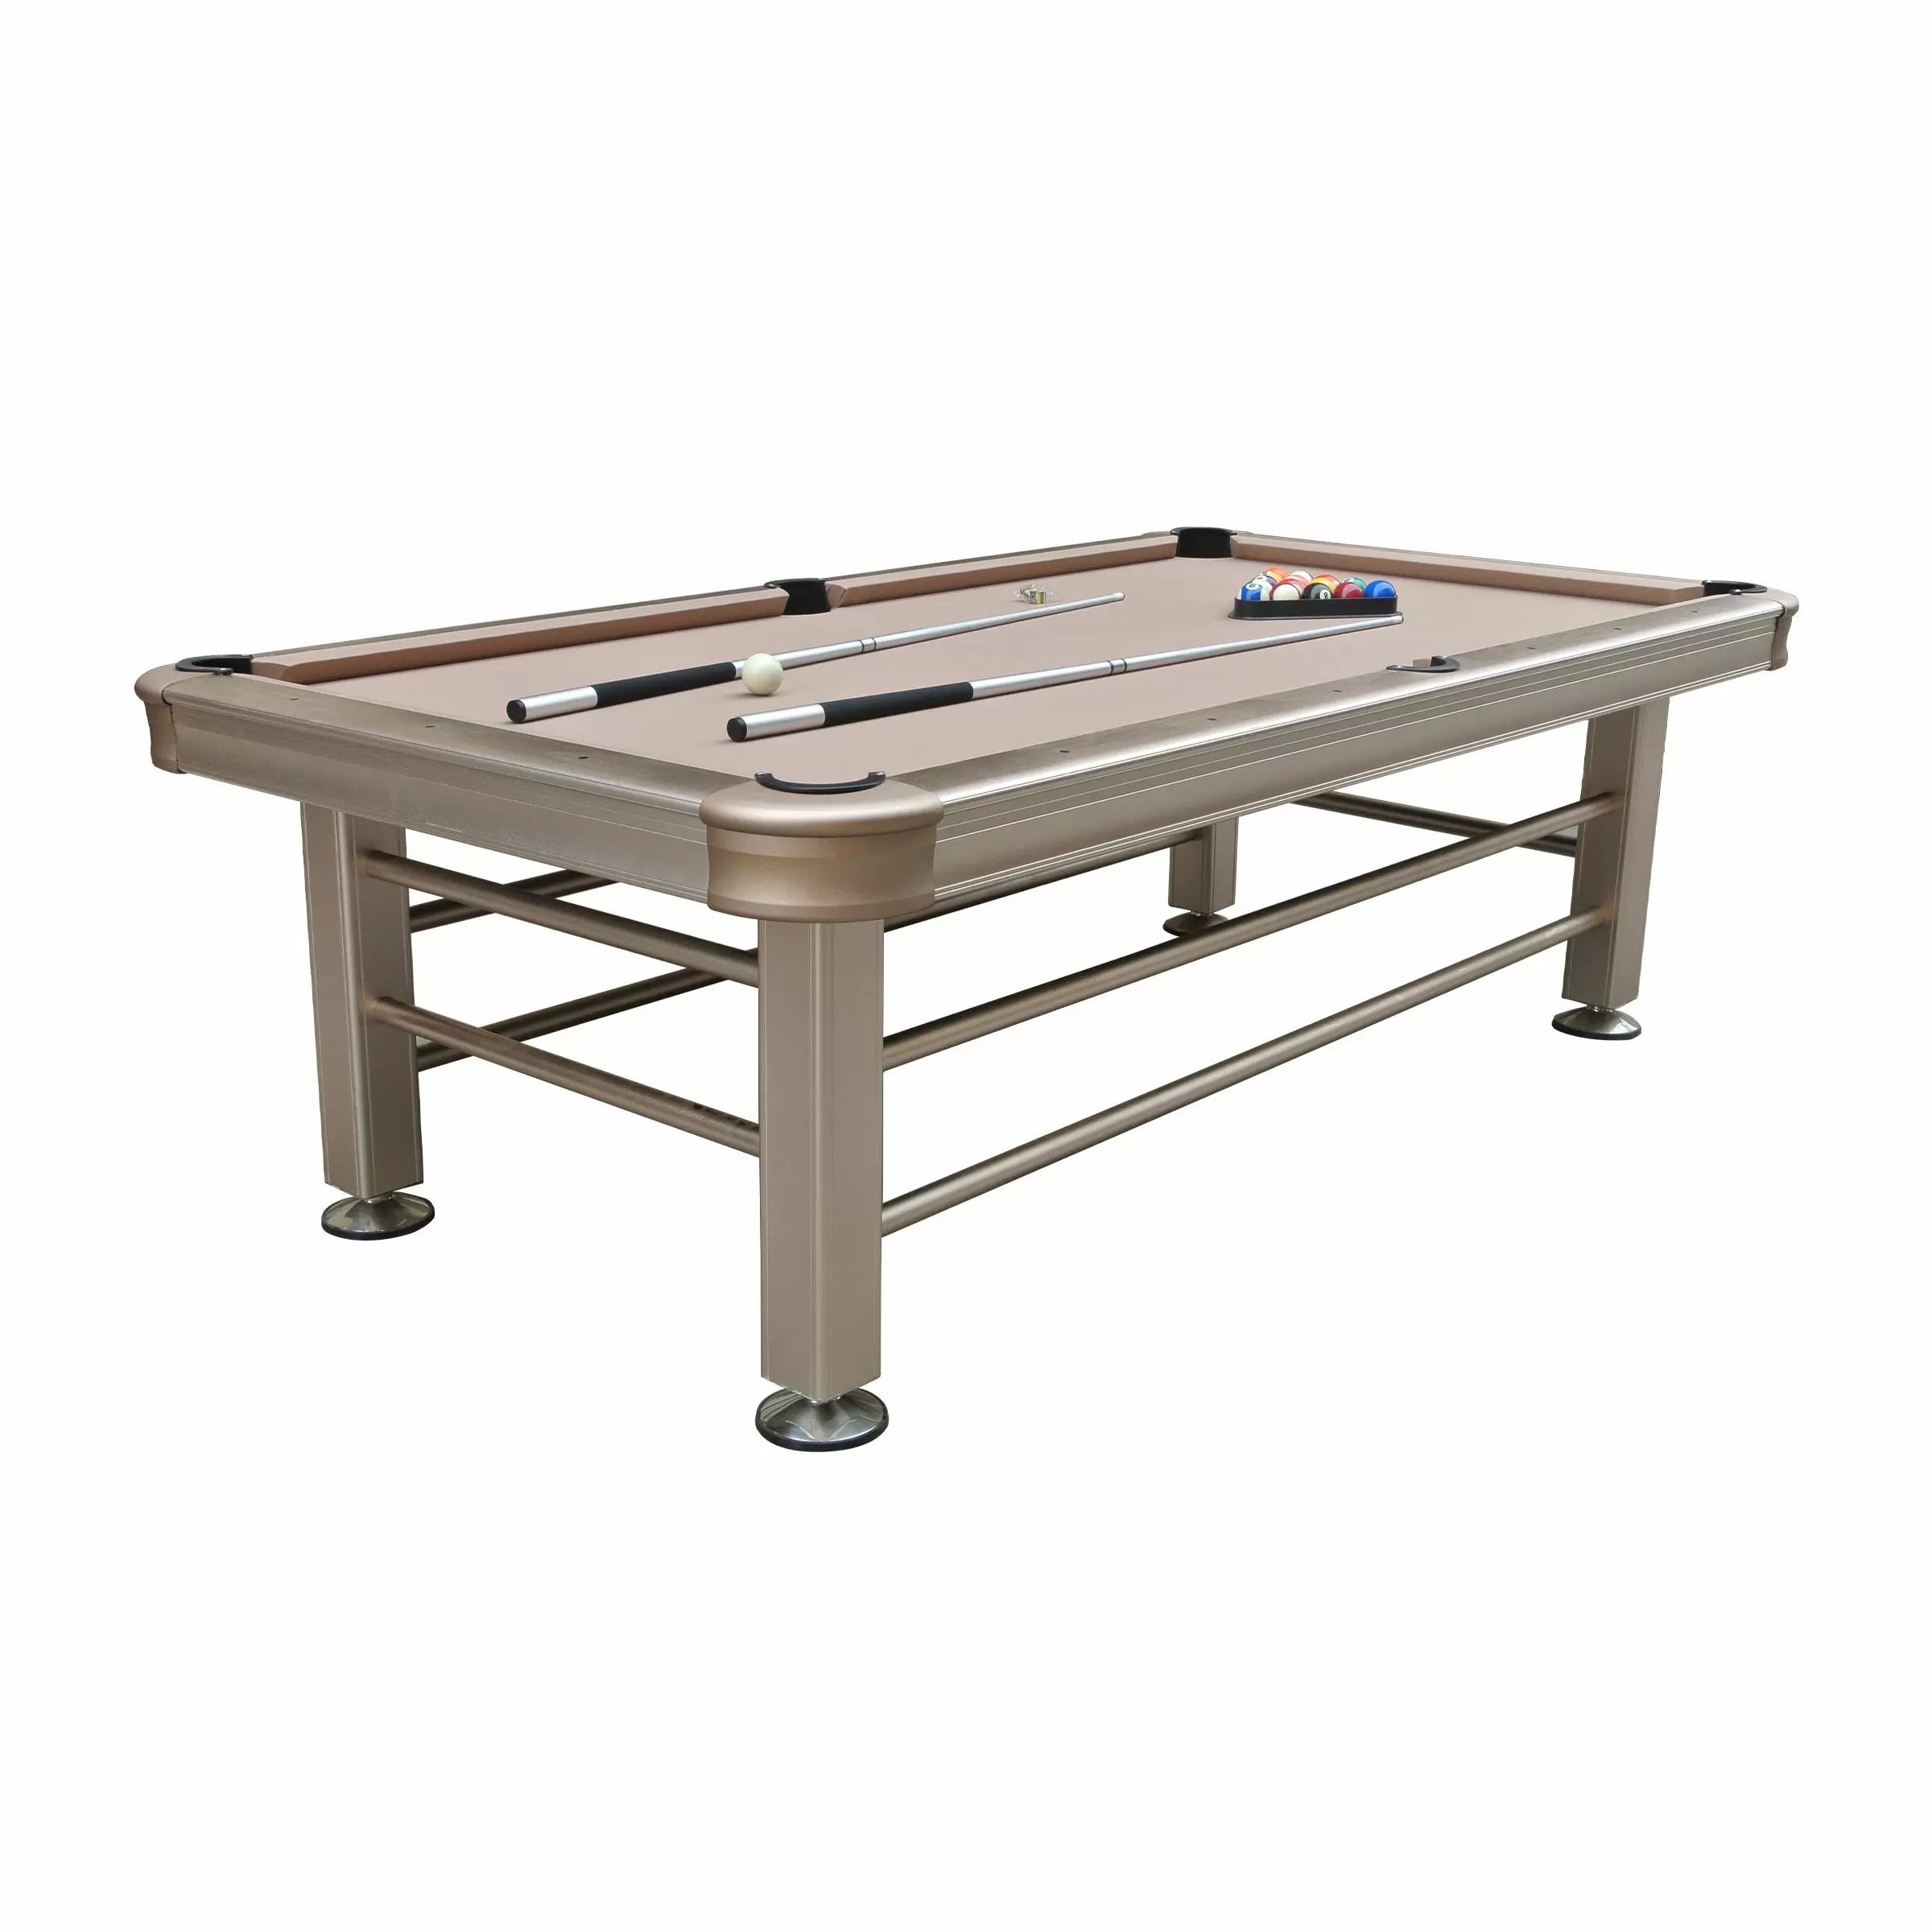 Imperial 7ft Outdoor Pool Table Champagne